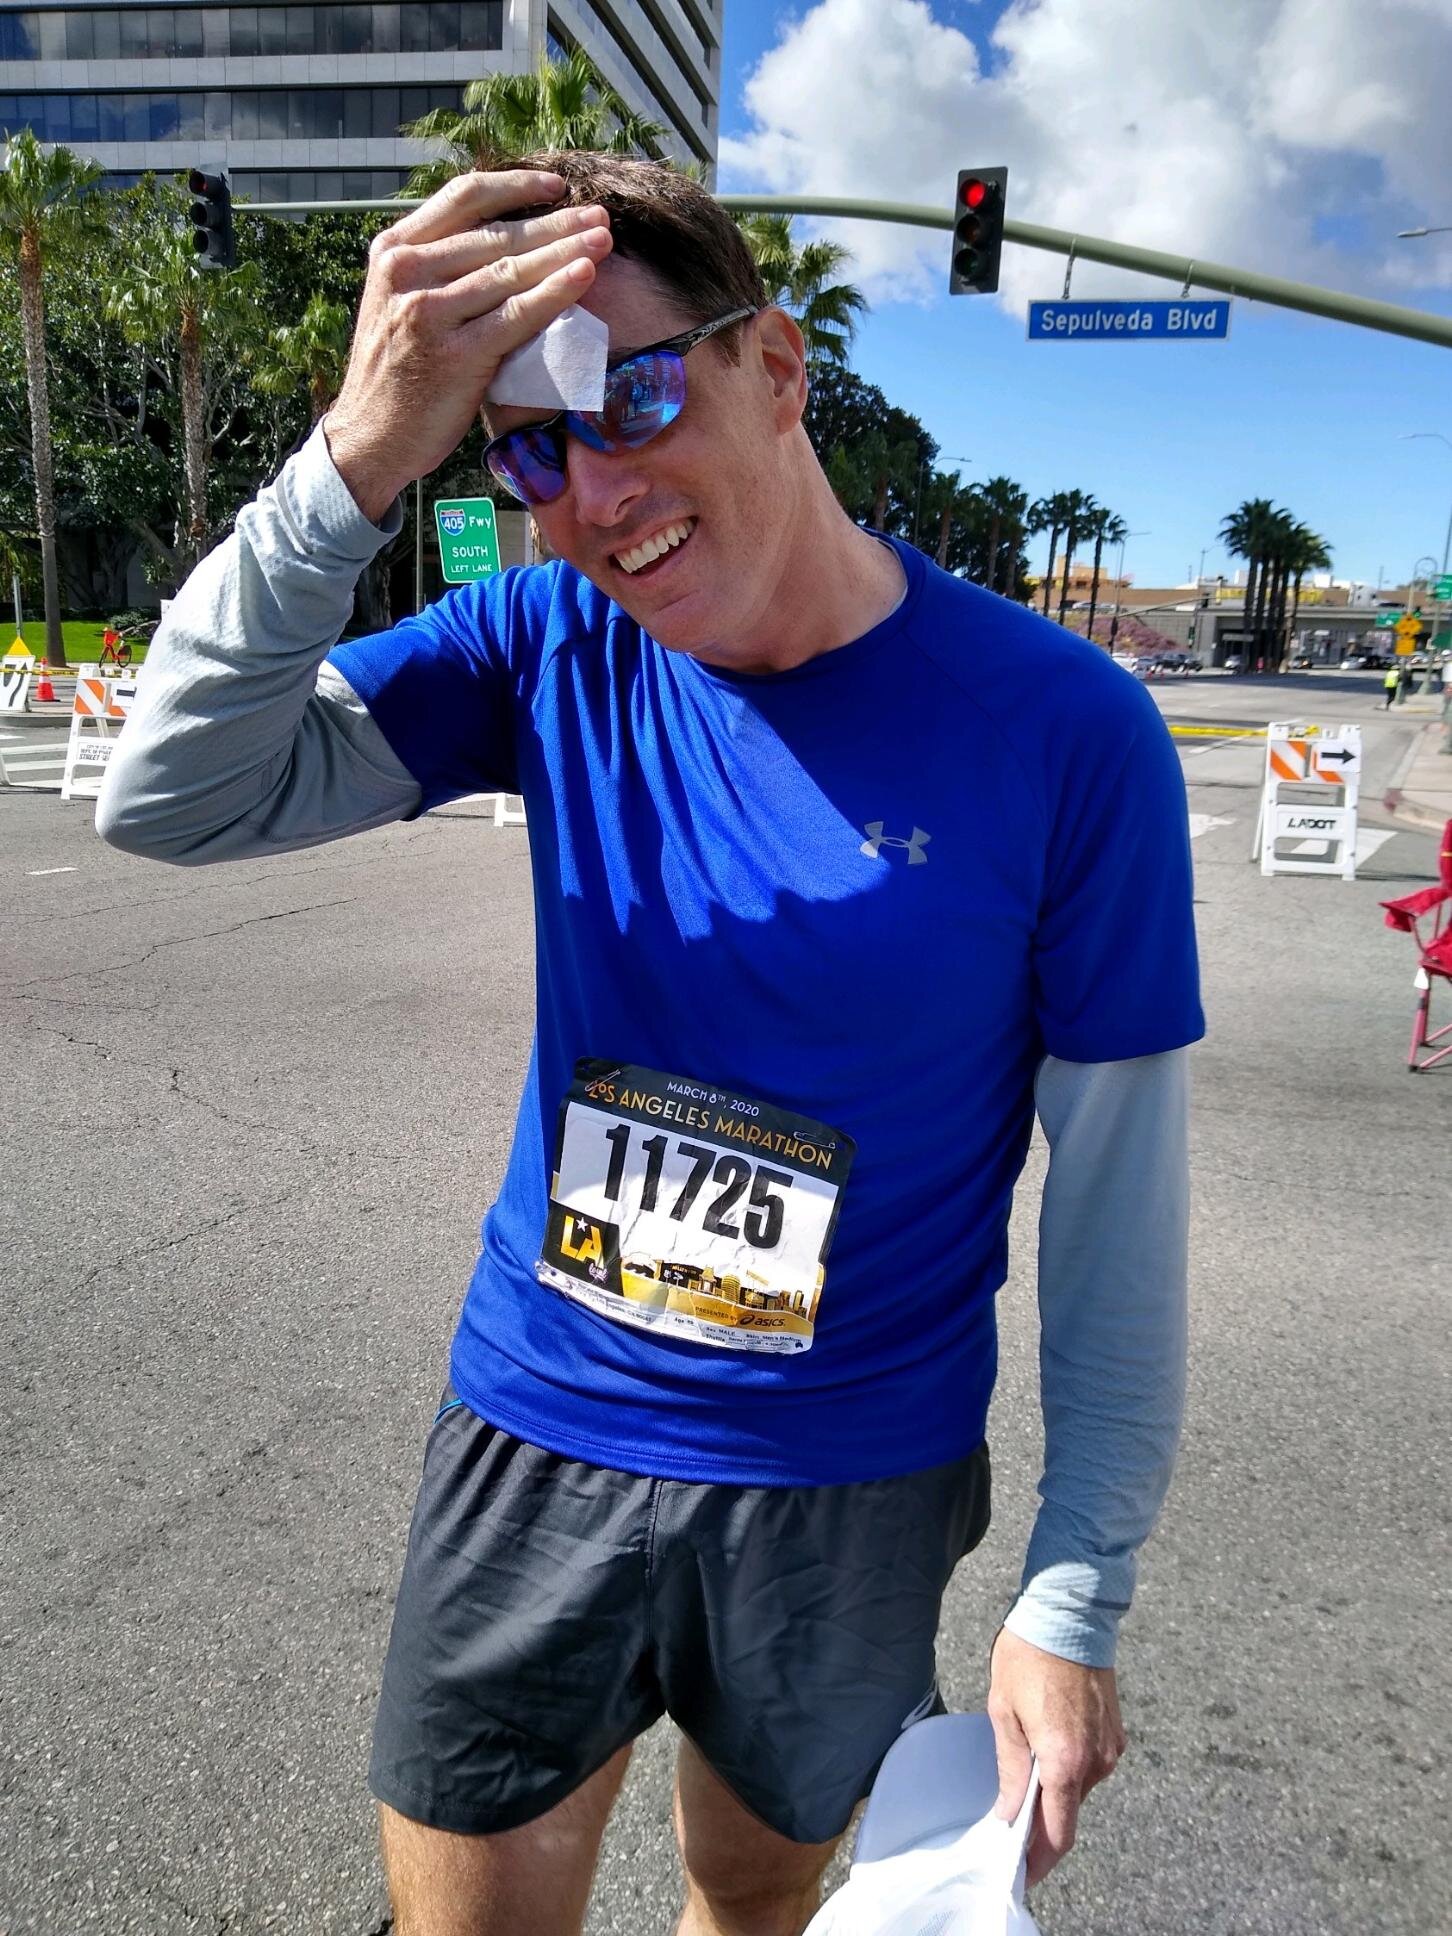 Me at mile 20. Photo taken by my mom.